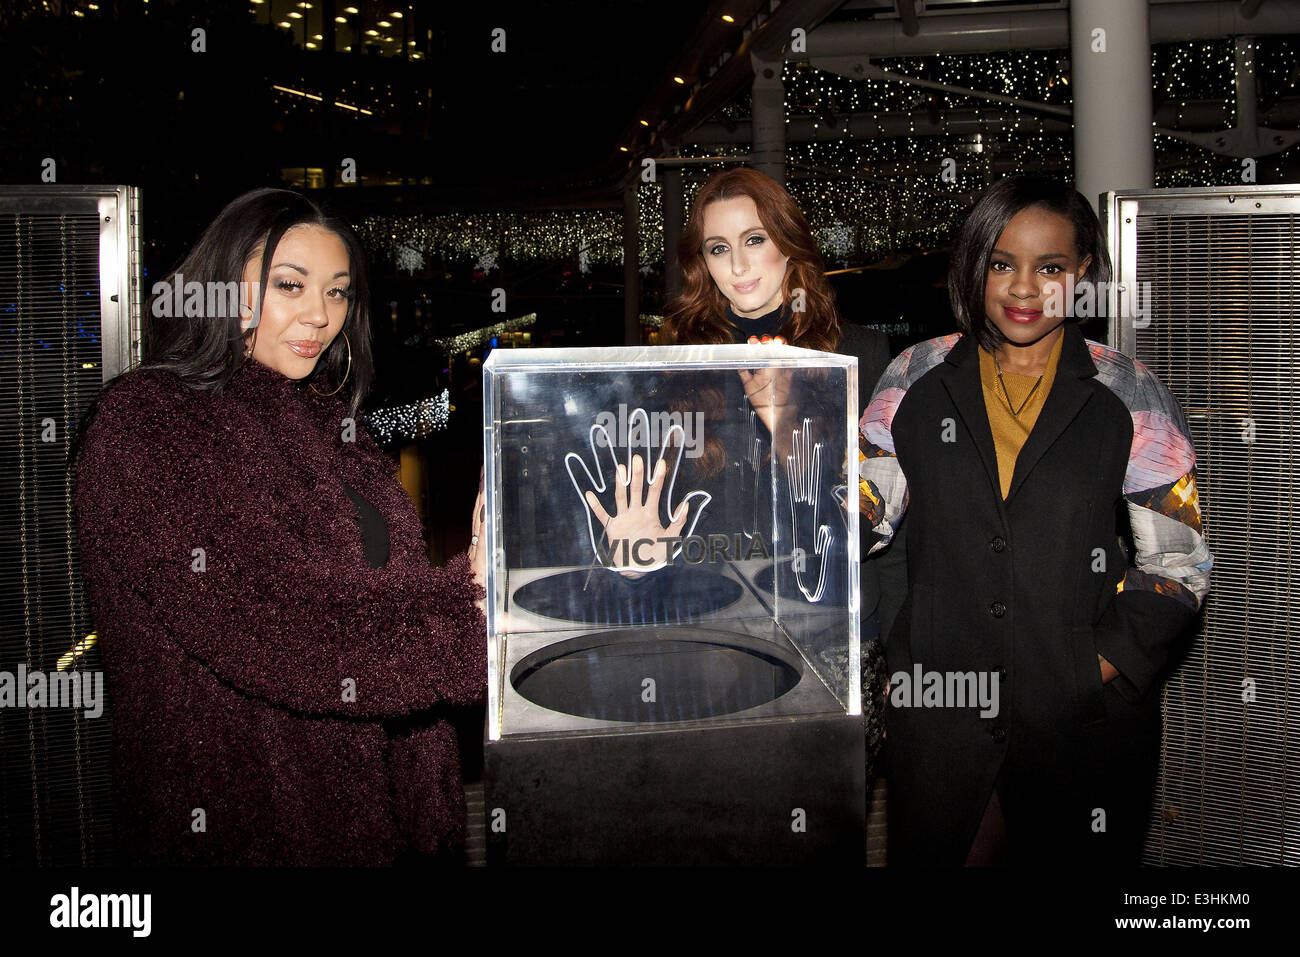 Mutya, Keisha, Siobhan (former and founding members of the Sugababes) perform live at the launch of the Create Christmas exhibition in the Cardinal Place shopping Centre in London's Victoria. The exhibition is made of giant photographs projected onto the Stock Photo